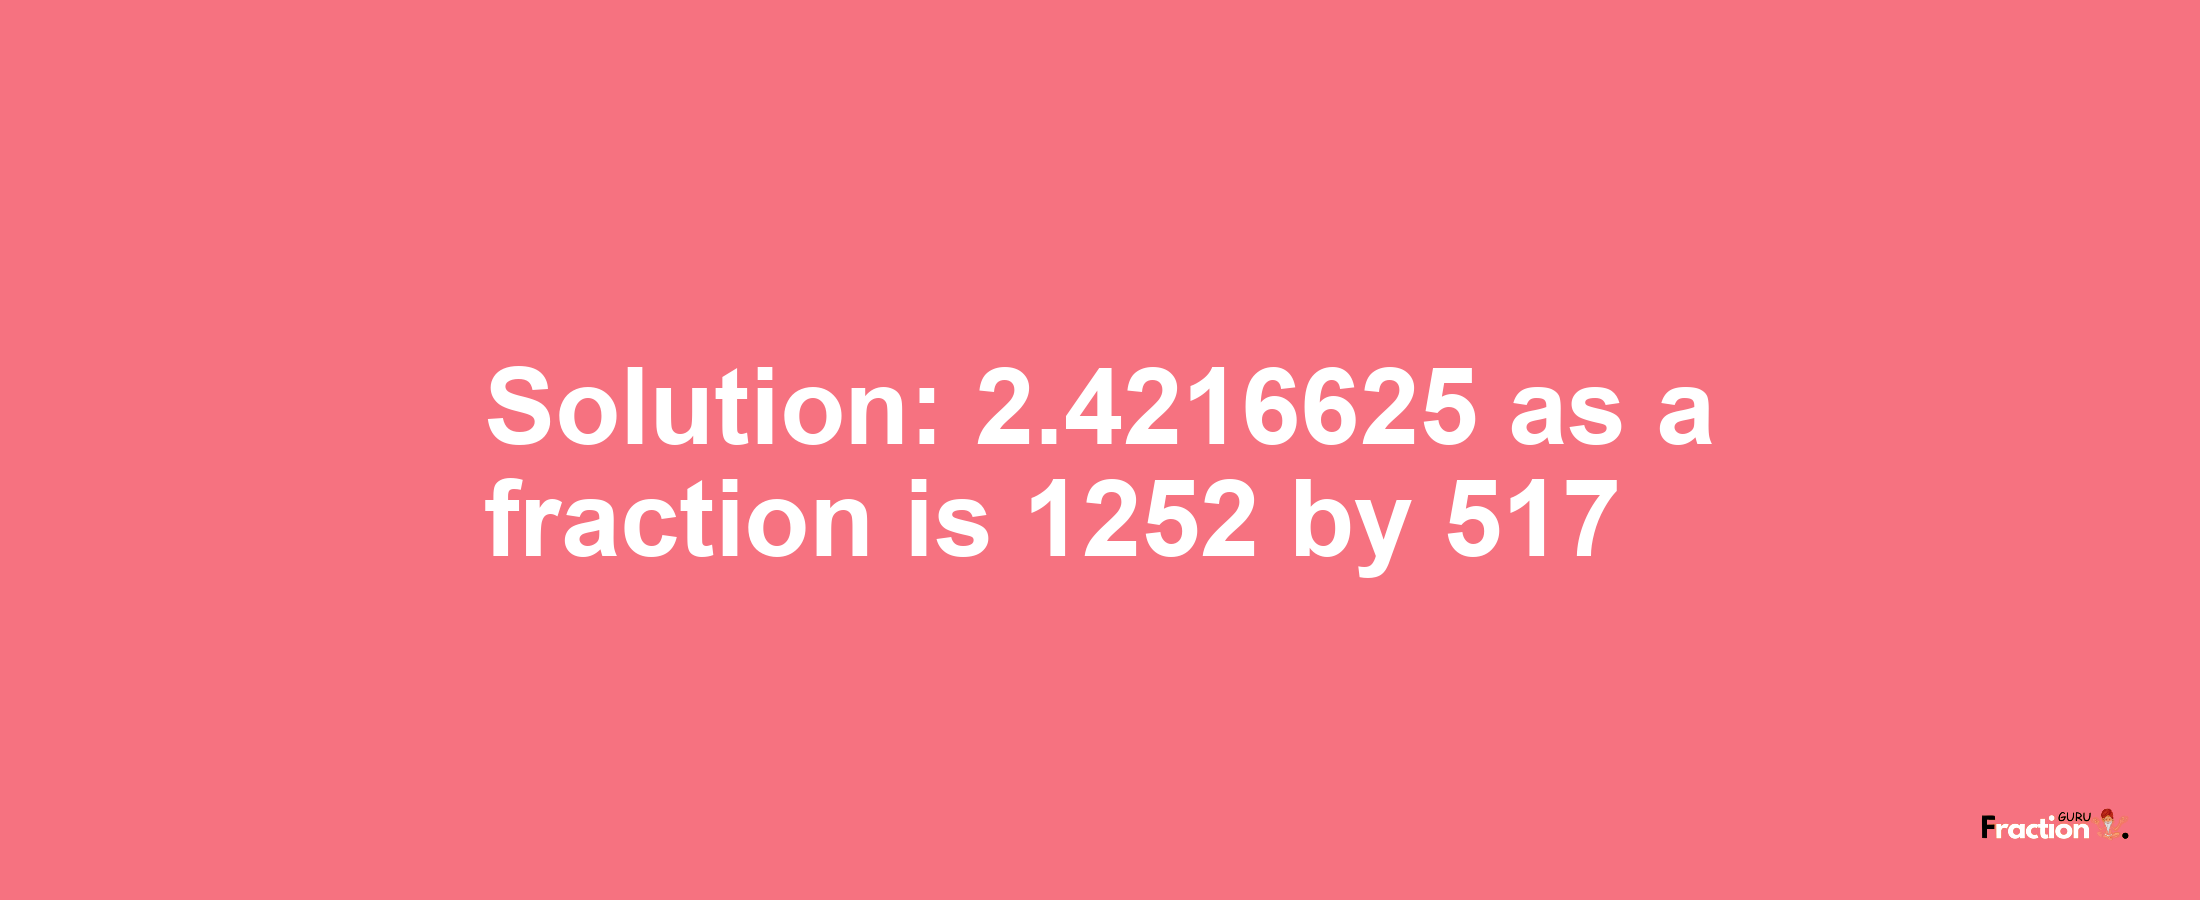 Solution:2.4216625 as a fraction is 1252/517